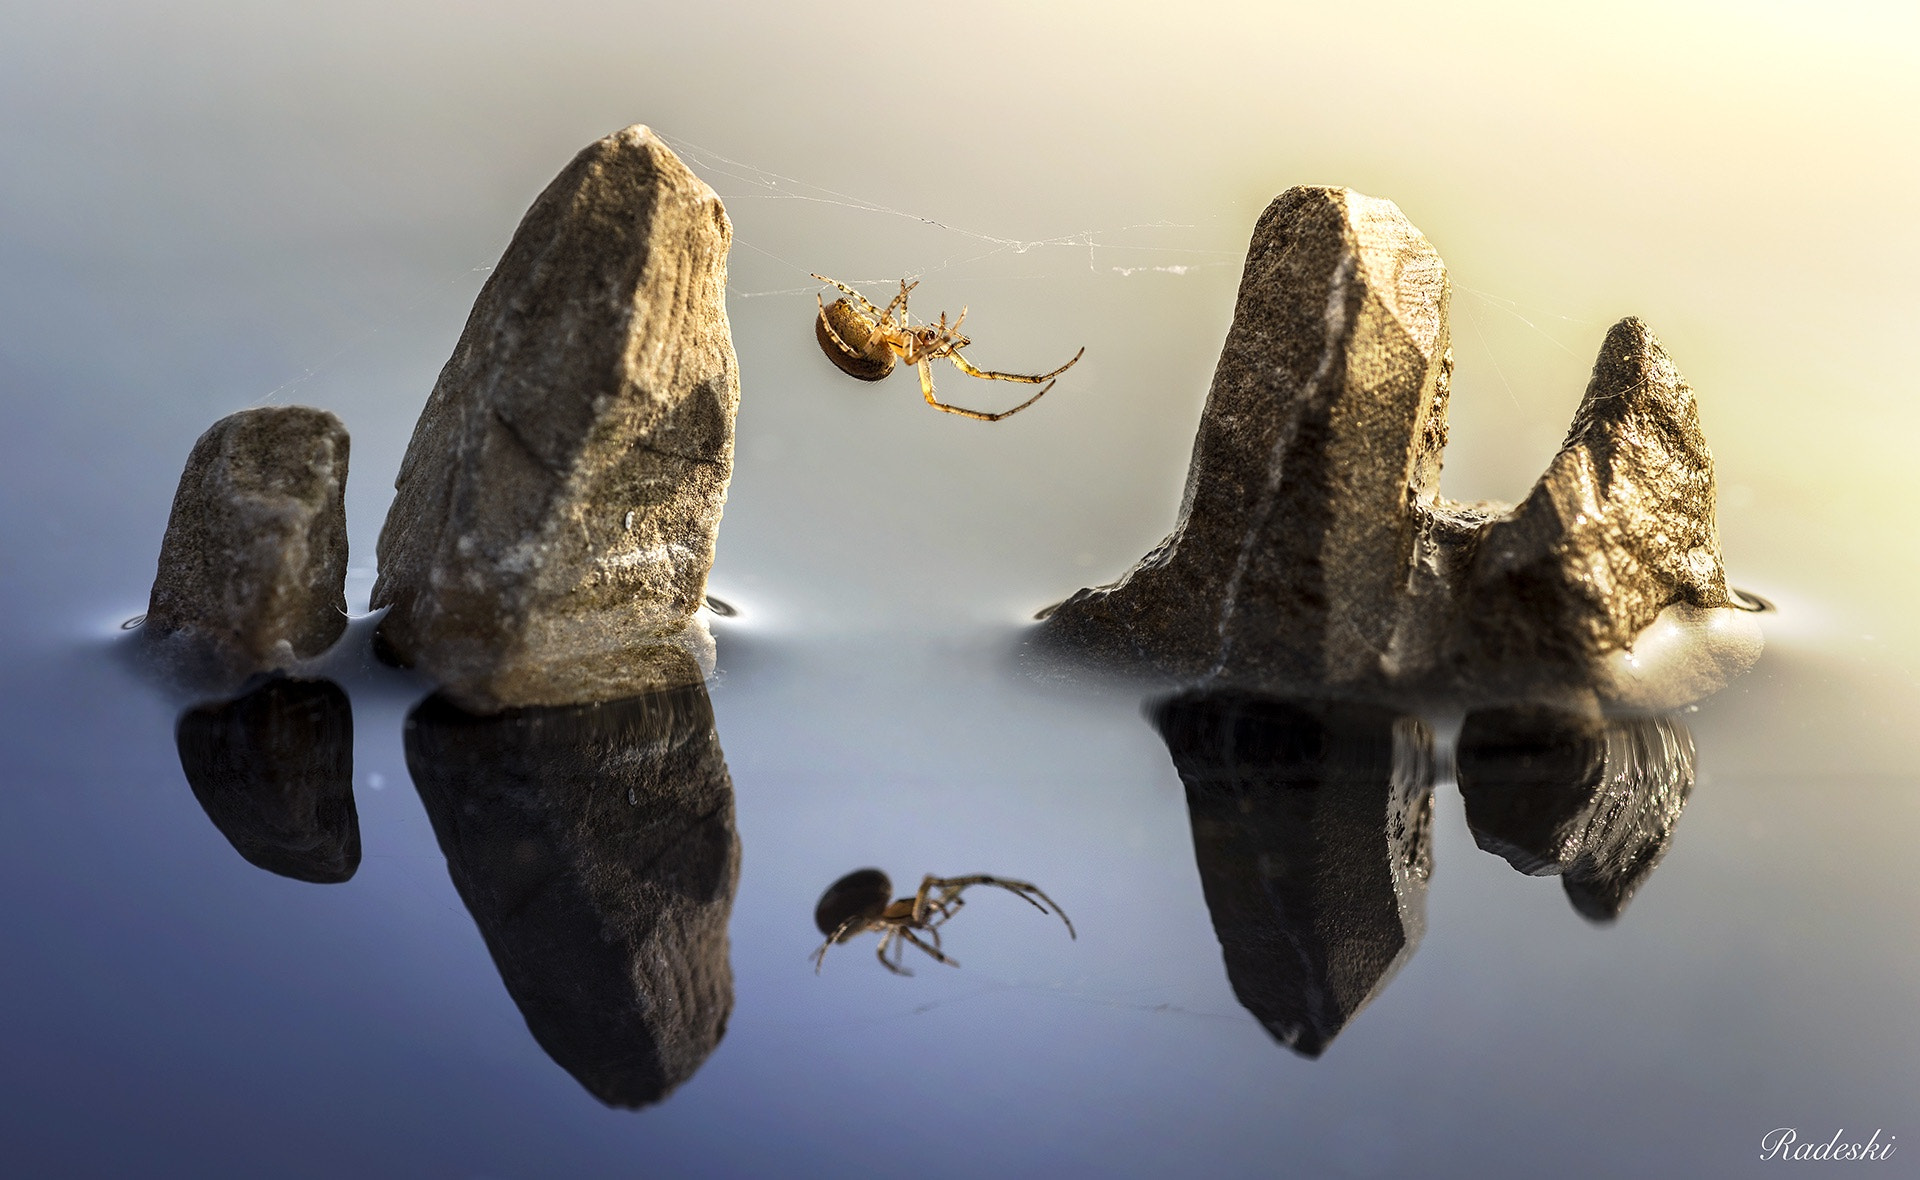 Nikon D800E sample photo. Spider in the rocks photography